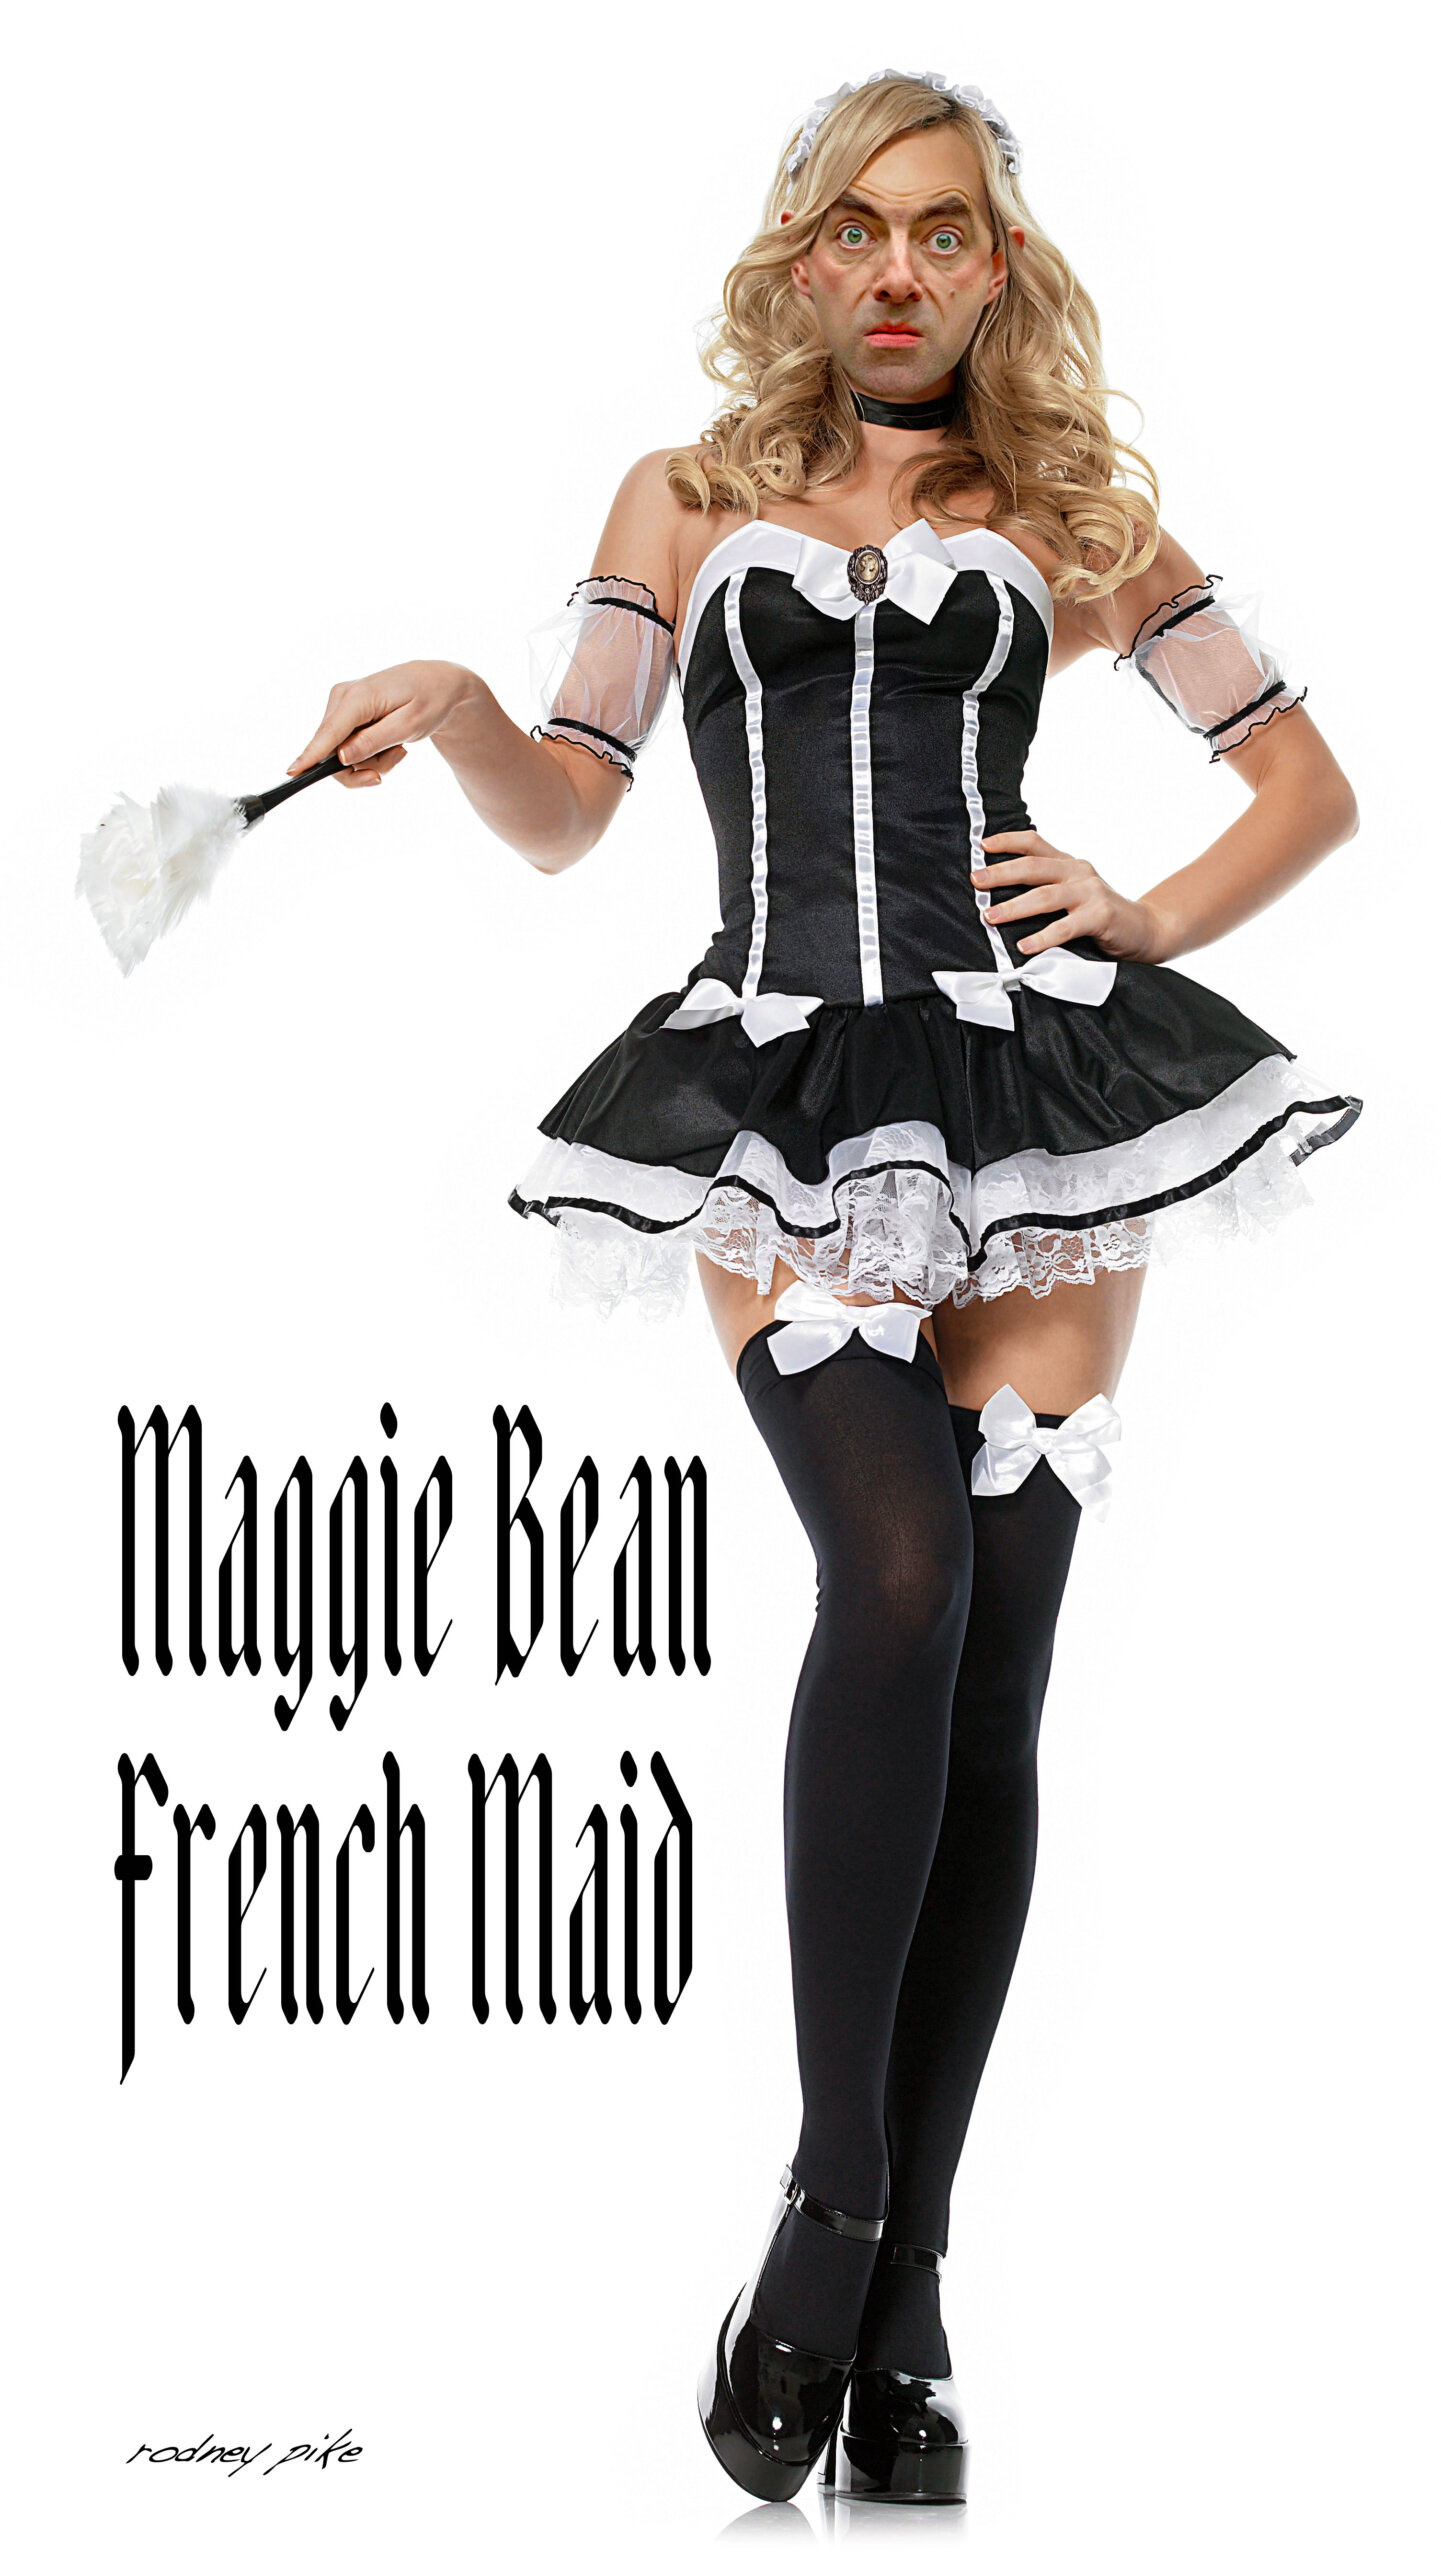 maggie bean french maid rodney pike